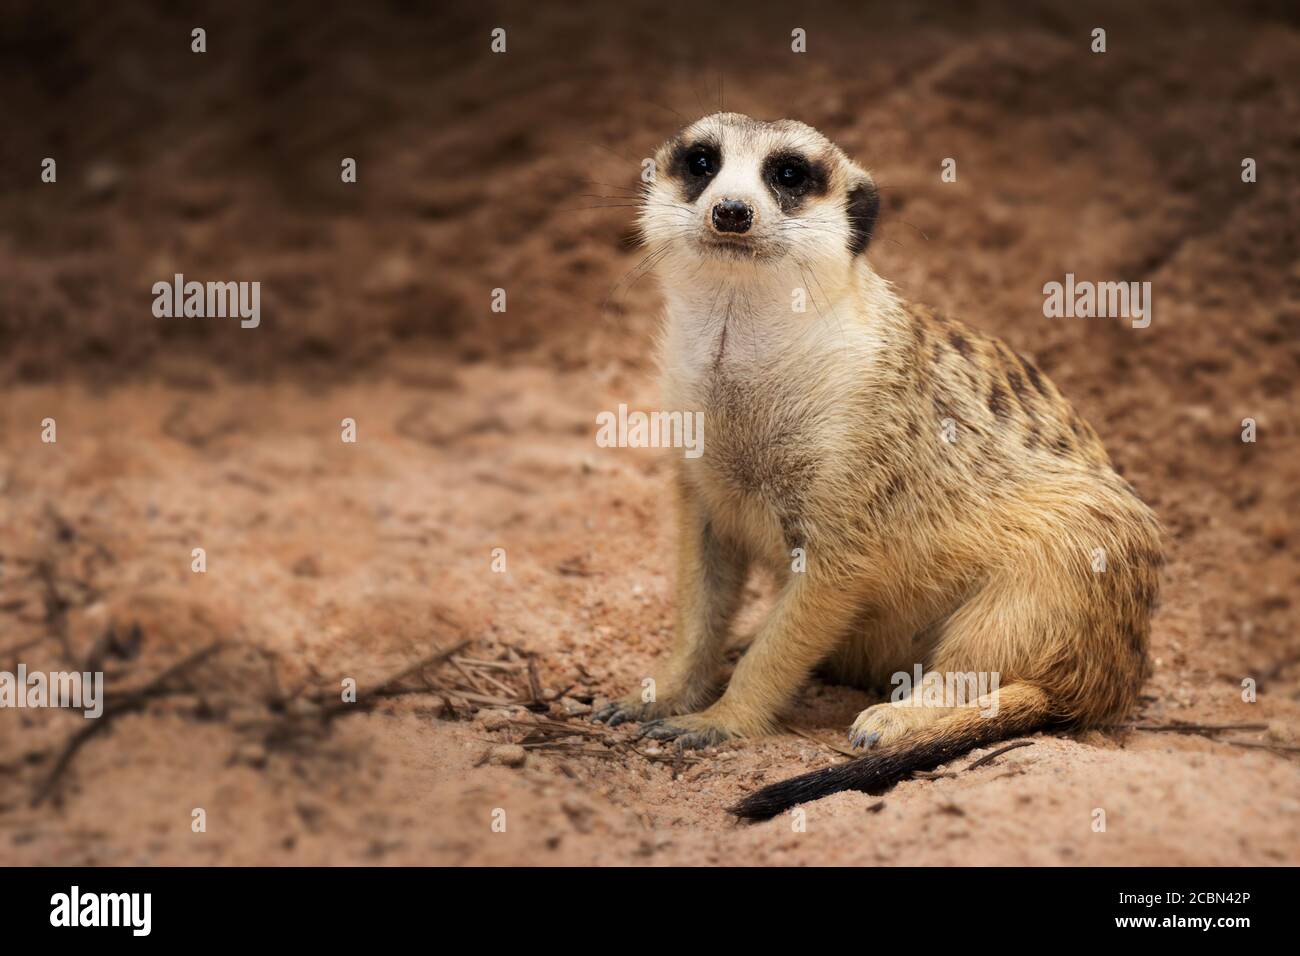 Isolated single dark bands on the back and a black-tipped tail meerkat (Suricate) sitting alone on the ground Stock Photo